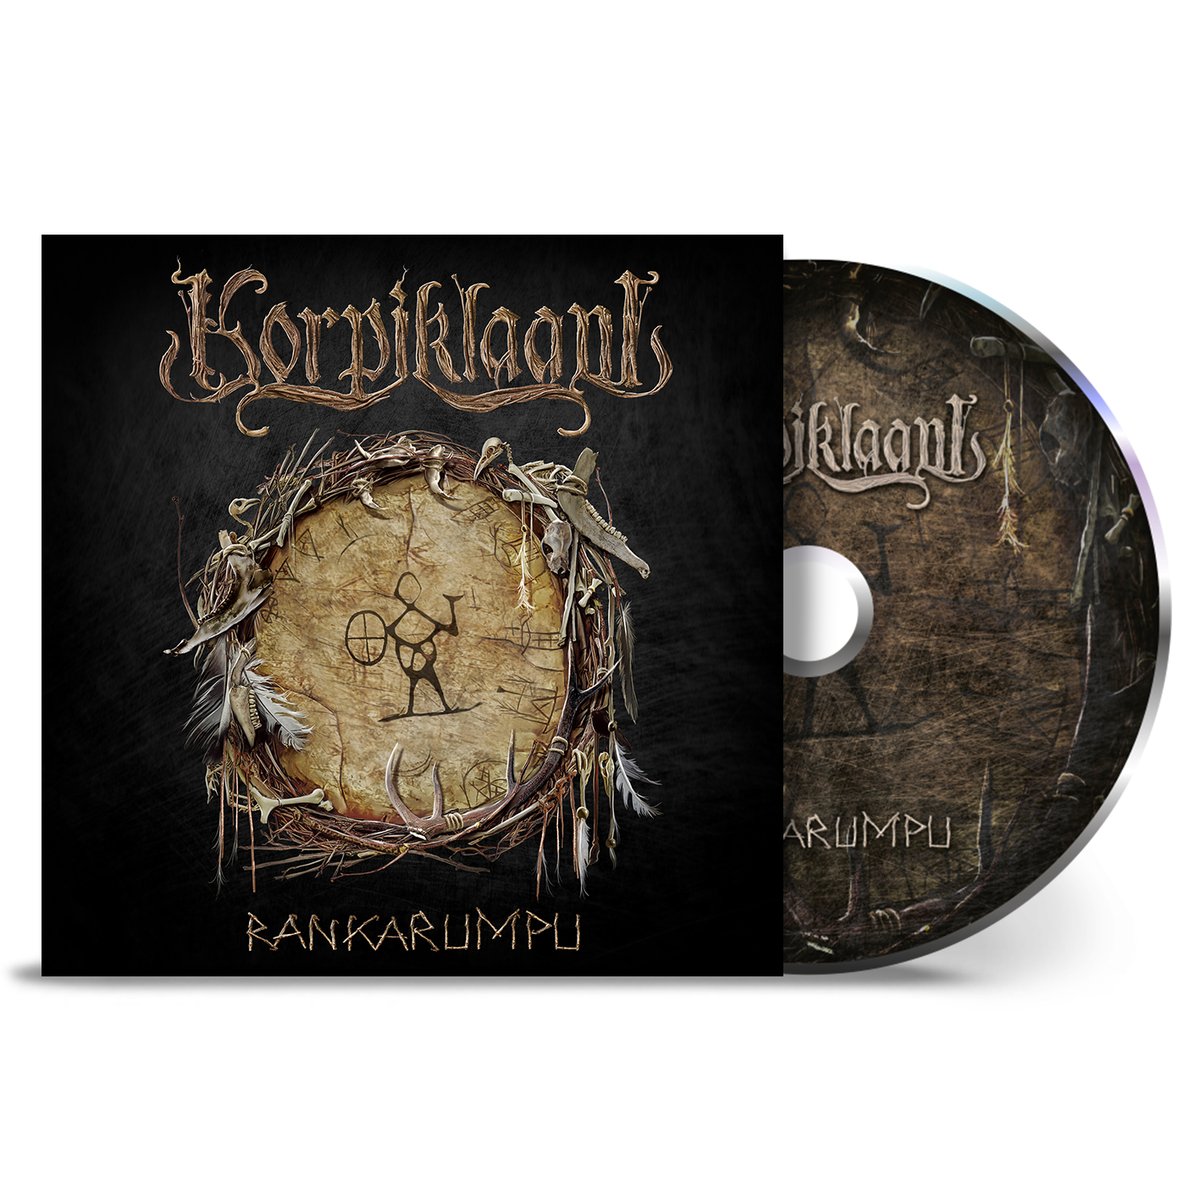 RANKARUMPU, new album out April 5th. Now available for pre-order in CD jewelcase and Gold with Black Splatter LP here: korpiklaani.bfan.link/rankarumpu